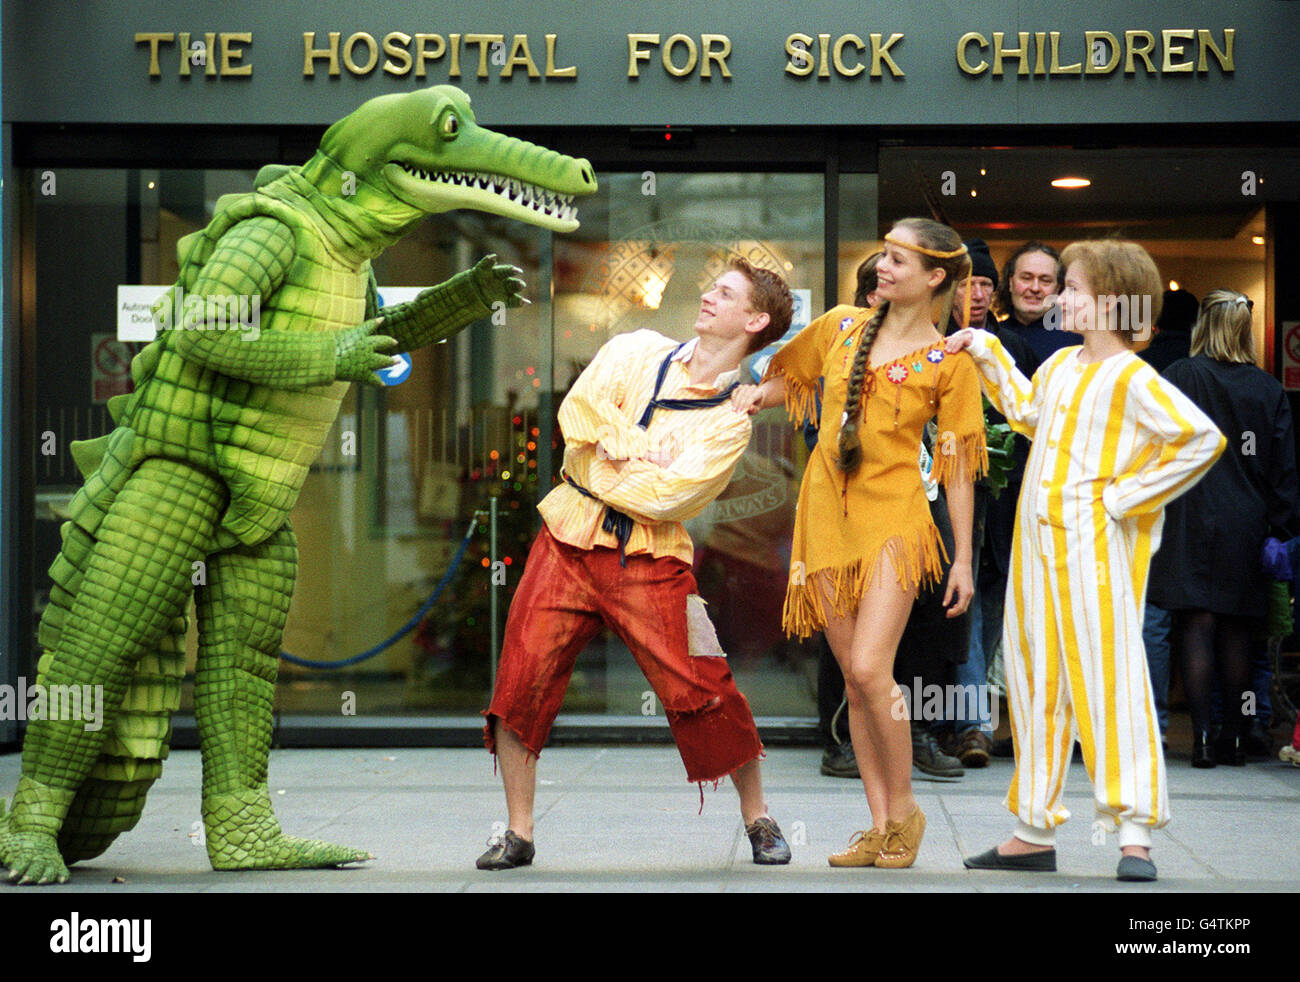 Cast members from the Atlanta Ballet production company outside Great Ormond Street Children's Hospital, in London. The group visited the children in the costumes from the performance Peter Pan, which will be staged at the Royal festival Hall from December 21st 1999. * Actors Left-right, Croc, Steve Slater, Lost Boy, Robin Galdwin, Indian Maiden, Amy Lawson and Michael, Lainey Schilling. Stock Photo